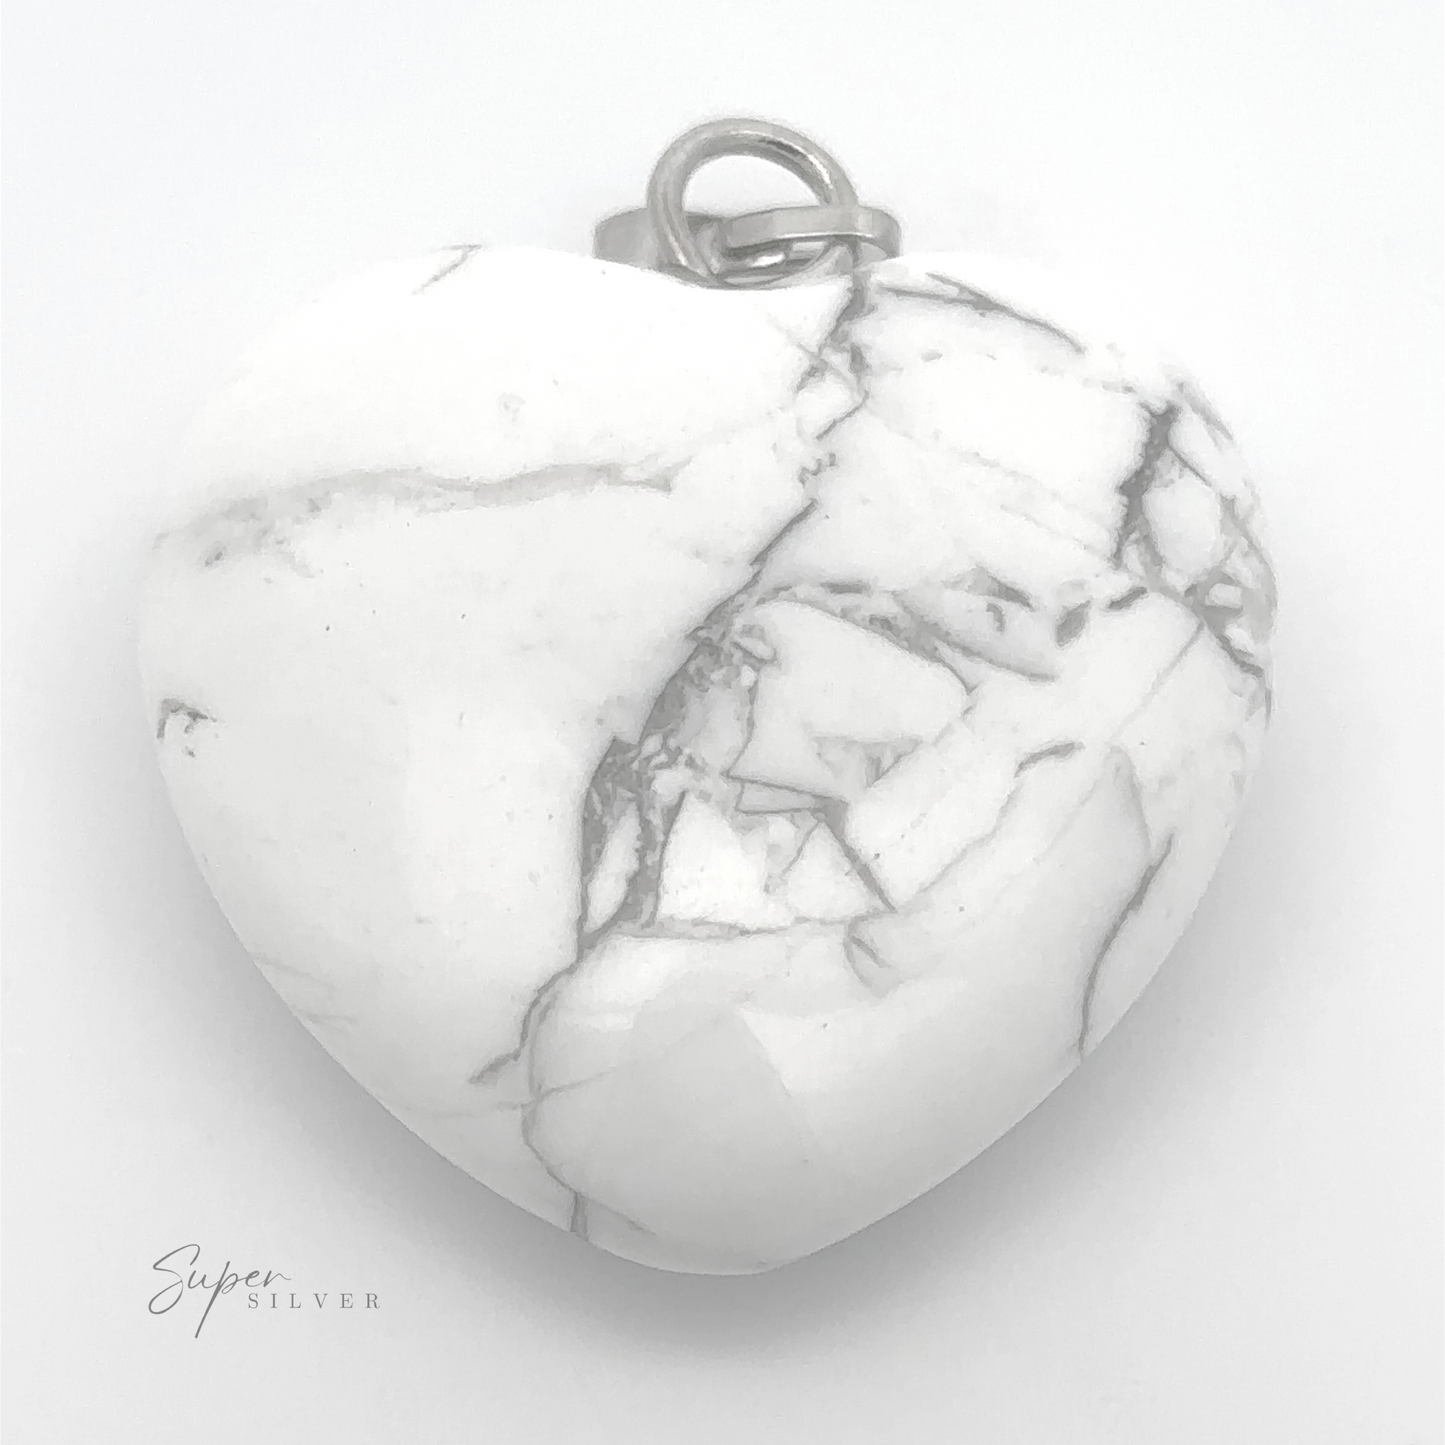 
                  
                    A Heart Stone Pendant made of white marble with gray veins, featuring a small metal loop at the top for everyday wear. Letters "Super Silver" are visible in the bottom left corner.
                  
                